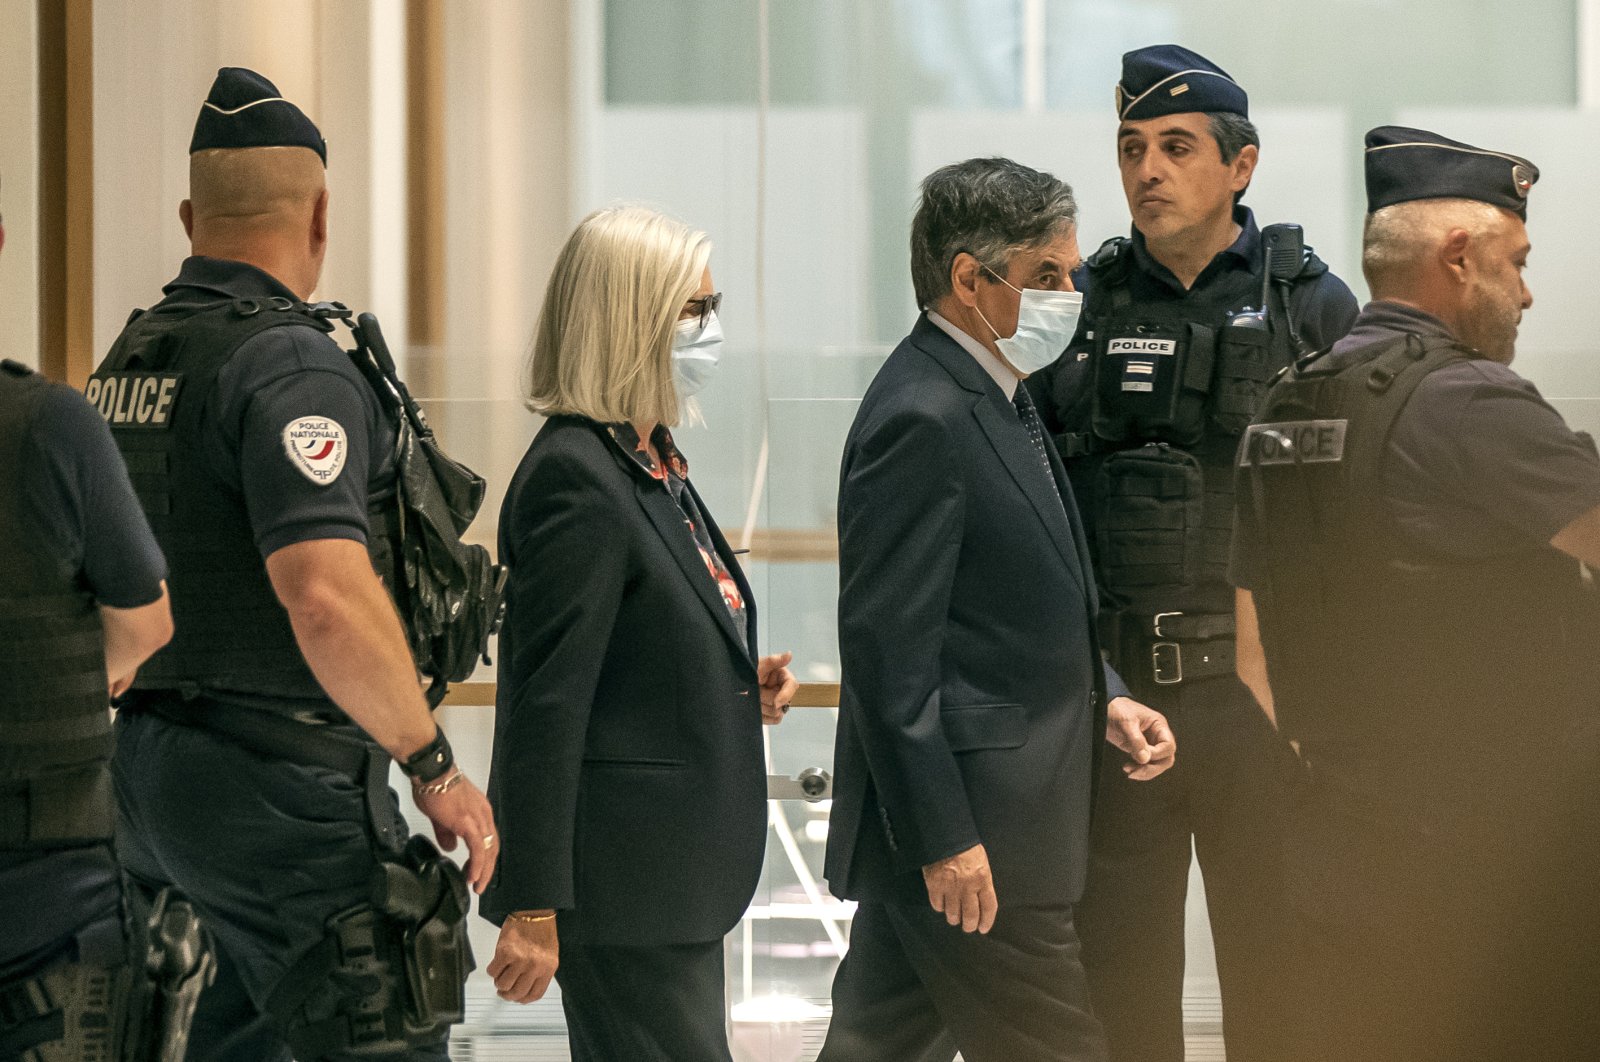 France's former Prime Minister Francois Fillon (R) and his wife Penelope wear protective masks as they arrive at Paris courthouse, Paris, June 29, 2020. (AP Photo)